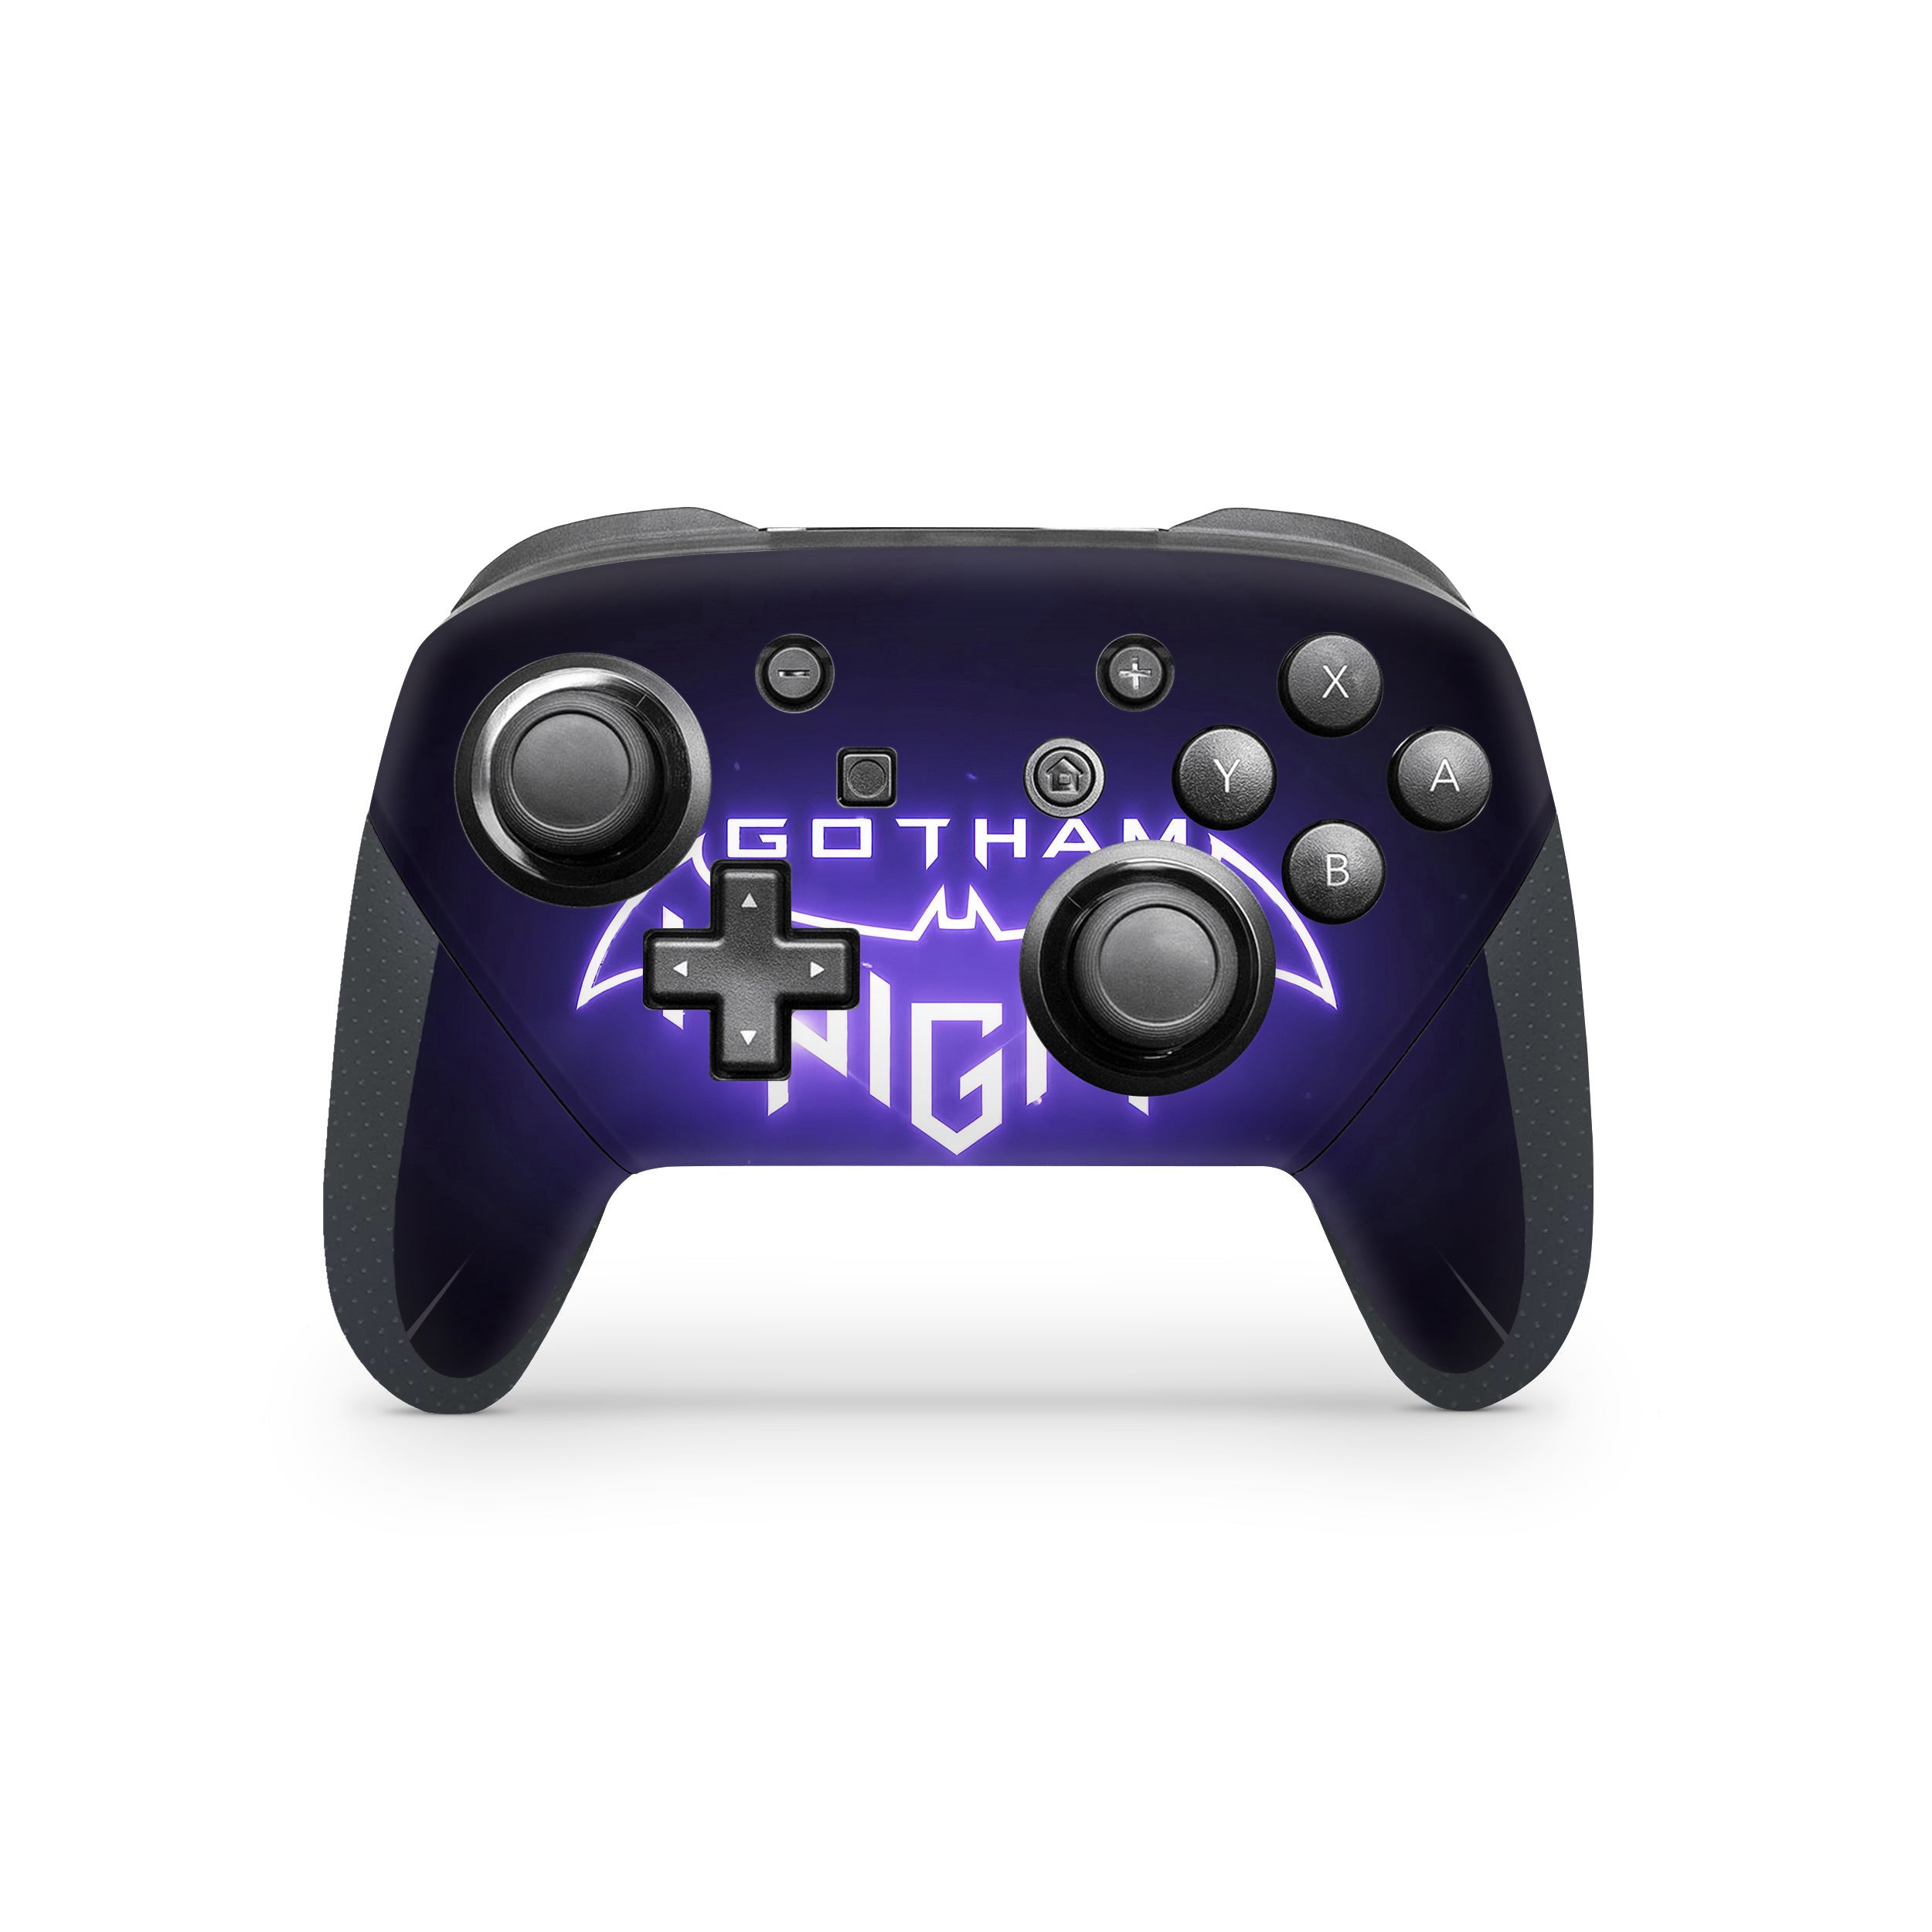 A video game skin featuring a DC Comics Gotham Knights design for the Switch Pro Controller.